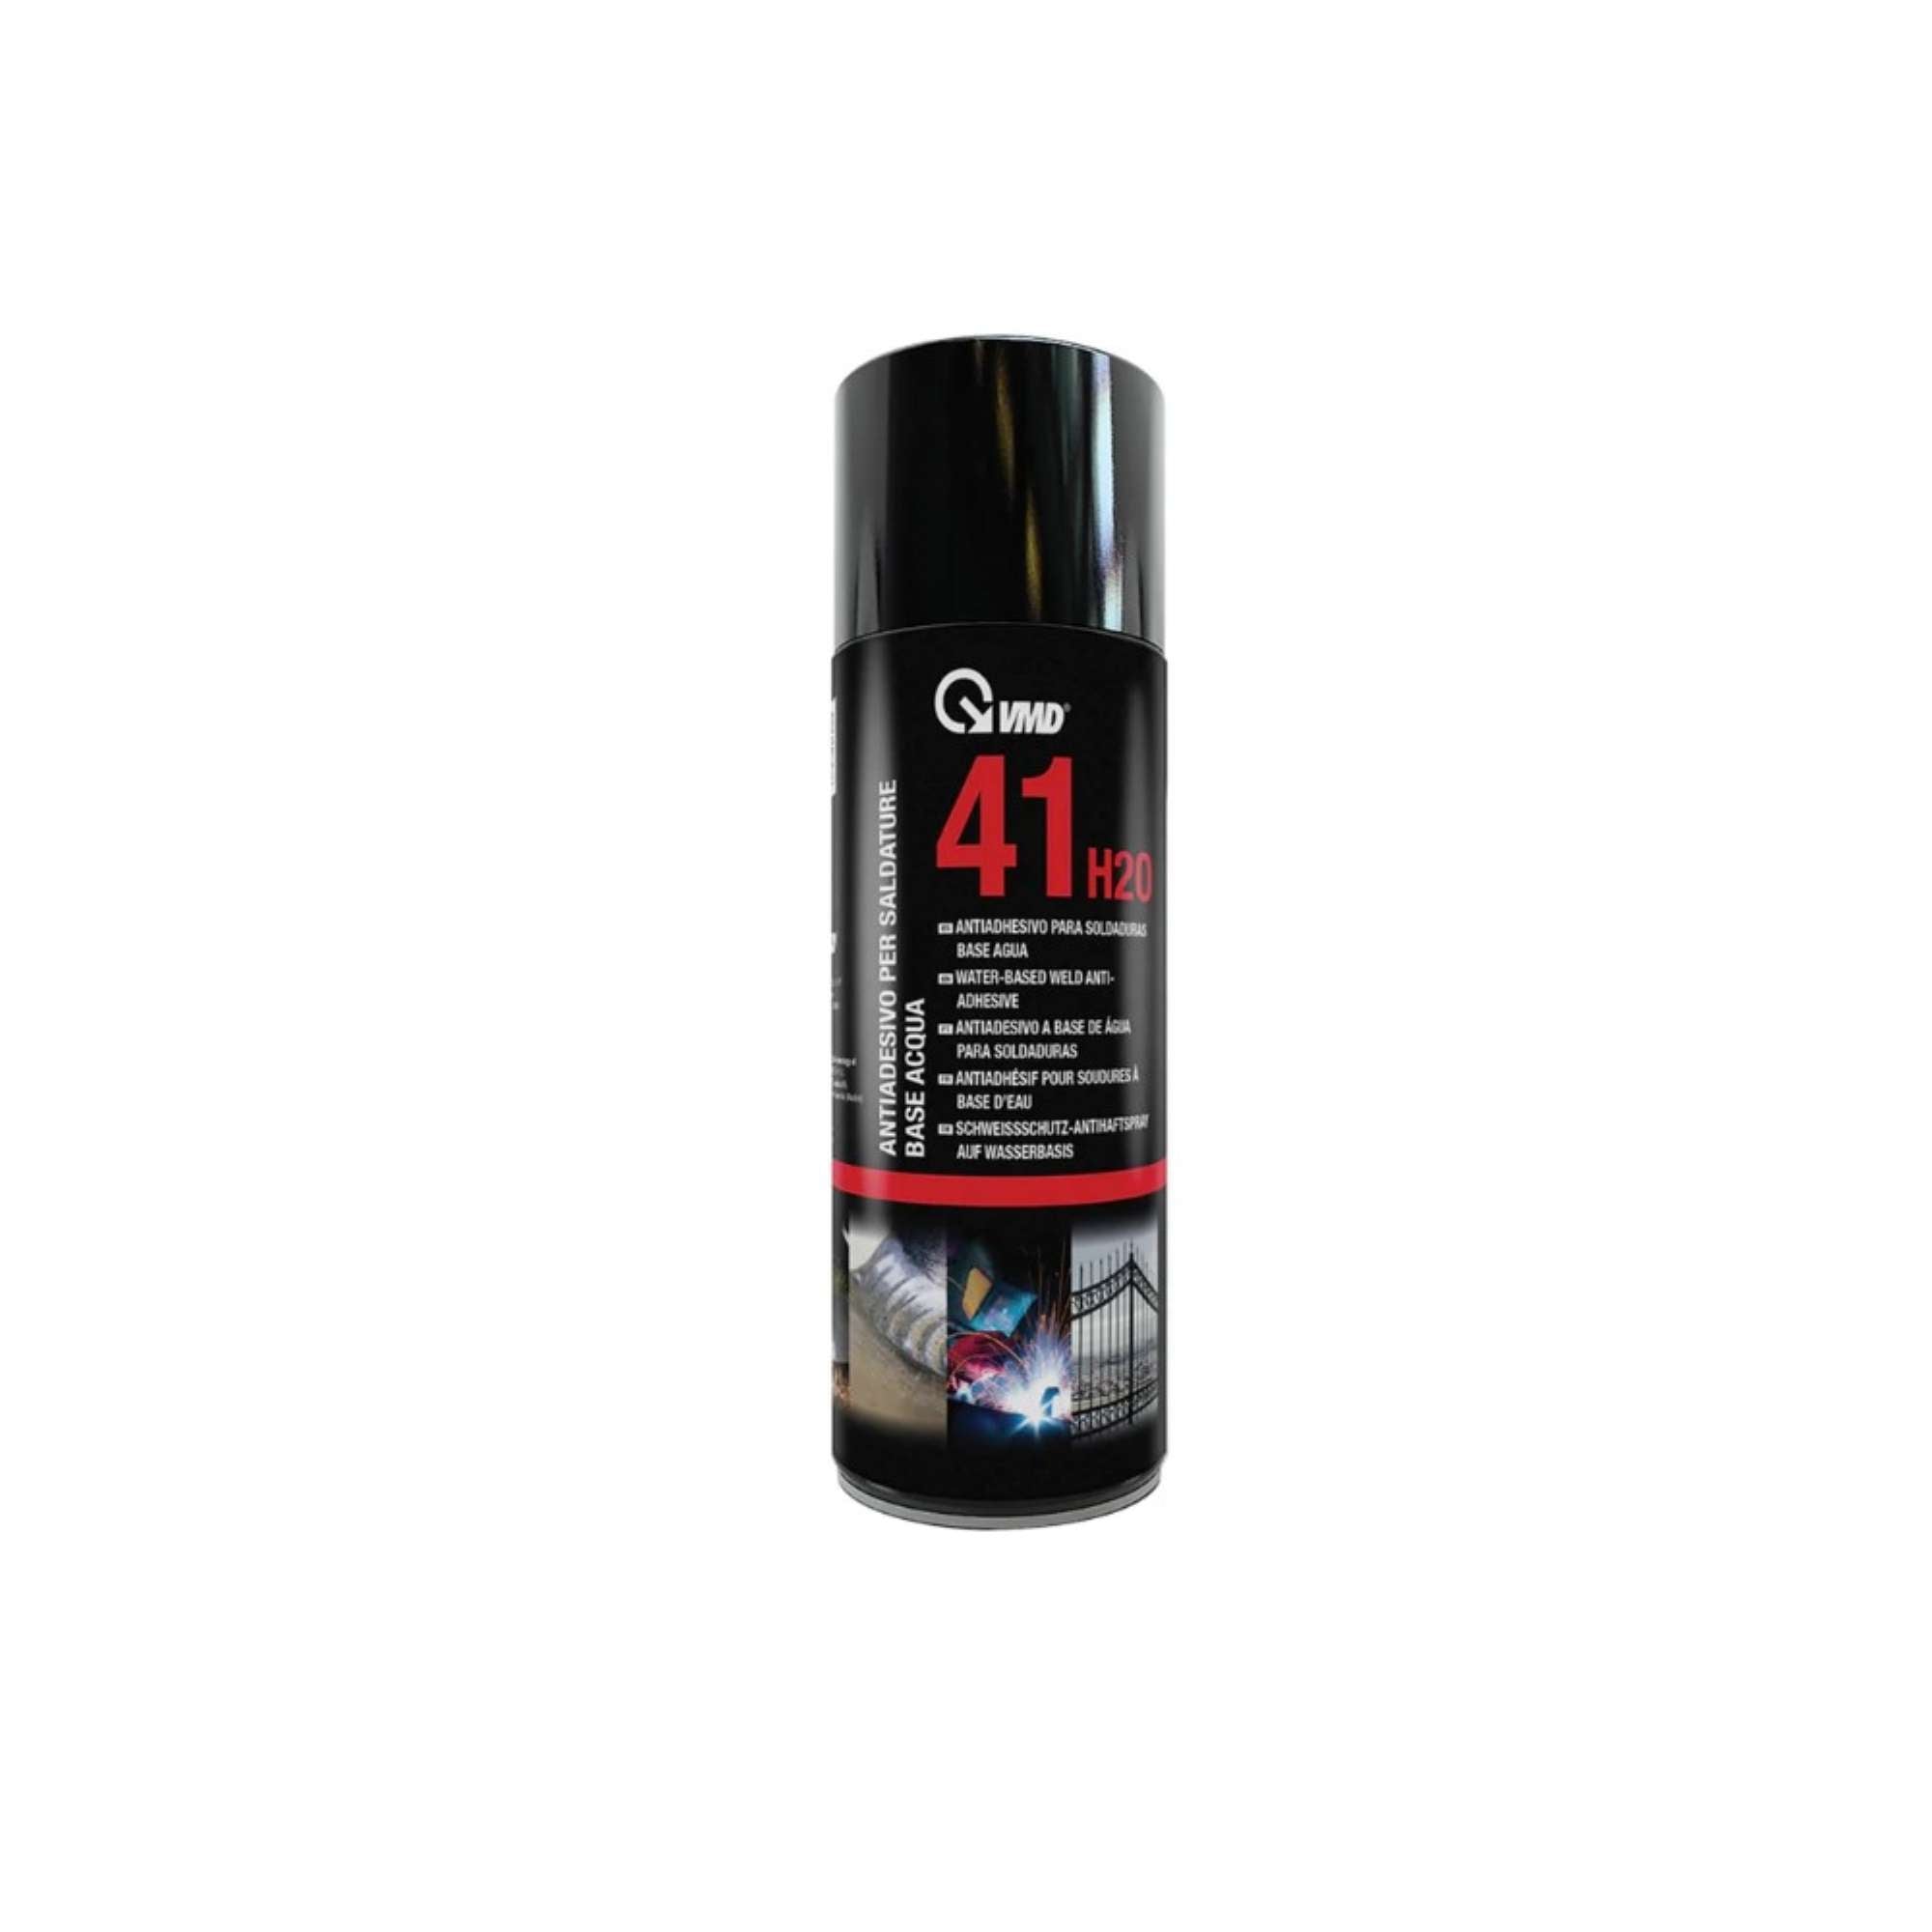 Water-Based Welding Adhesive - VMD 41H20